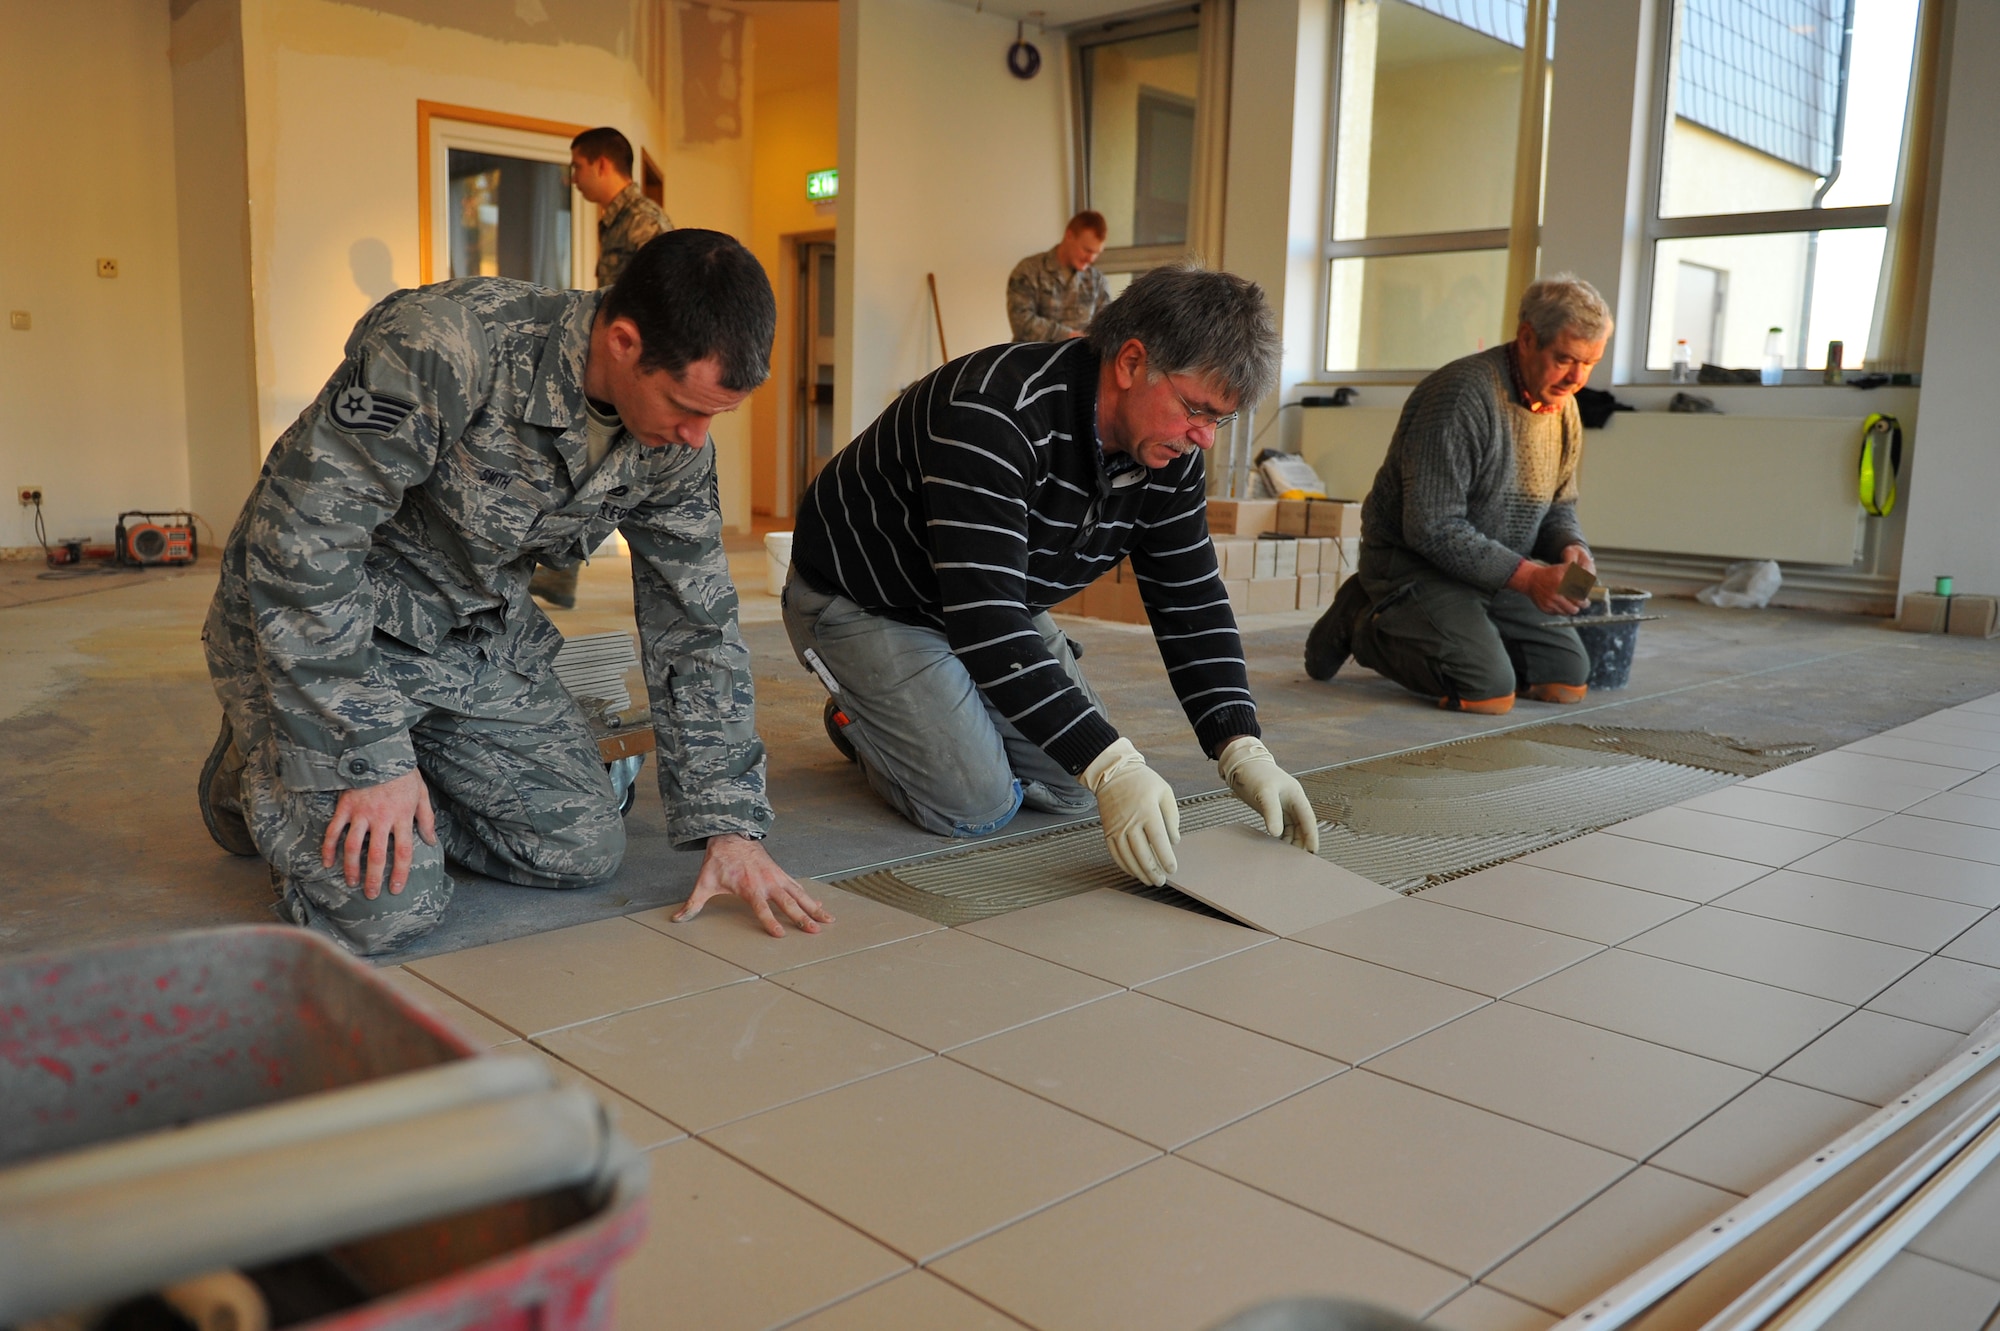 SPANGDAHLEM AIR BASE, Germany – Staff Sgt. Russell Smith and Manfred Blitsch, 52nd Civil Engineer Squadron structures craftsmen, lay tile inside the Mosel Dining Facility here Nov. 16. The 52nd CES is renovating the facility, to include, new flooring, paint, service line and storage facilities. Completion of the facility is scheduled for Jan. 15, 2012. (U.S. Air Force photo/Airman 1st Class Dillon Davis)